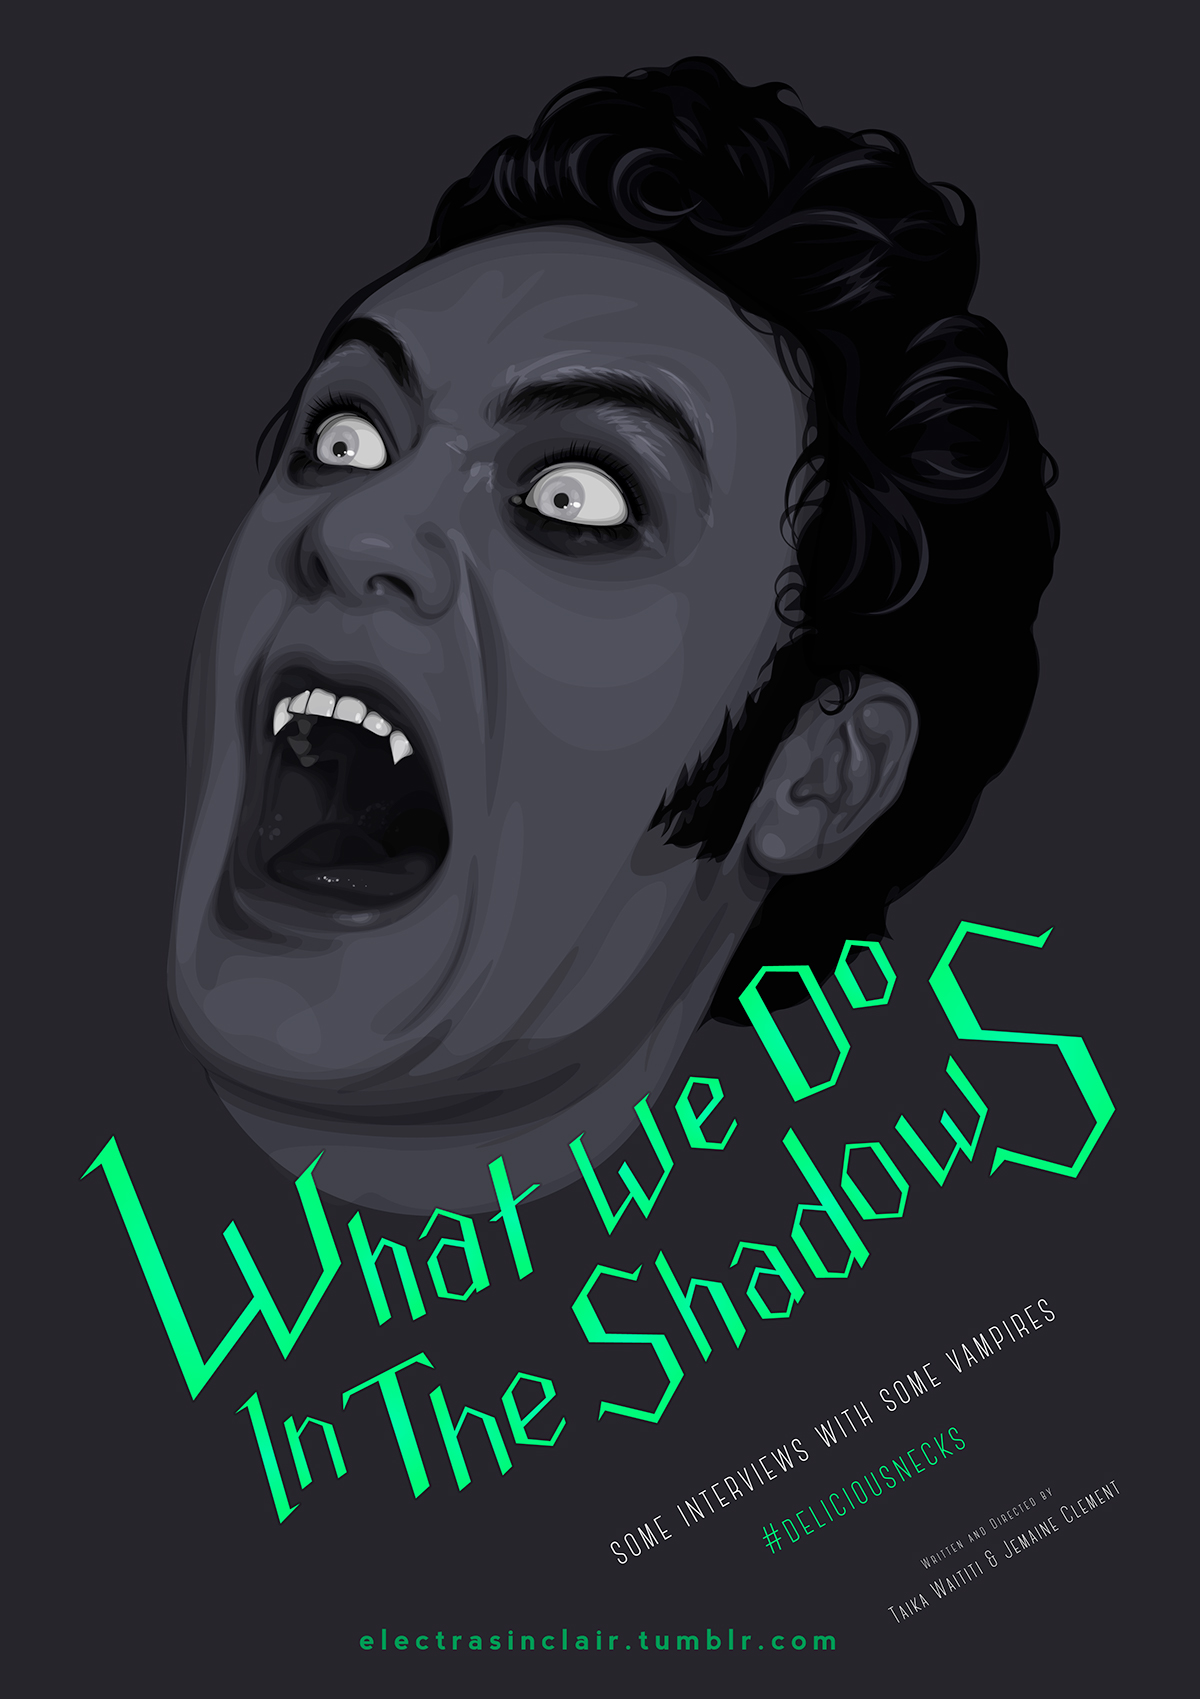 What we do In the shadows taika waititi movie poster grey blue green bright vampire vector portrait Electra